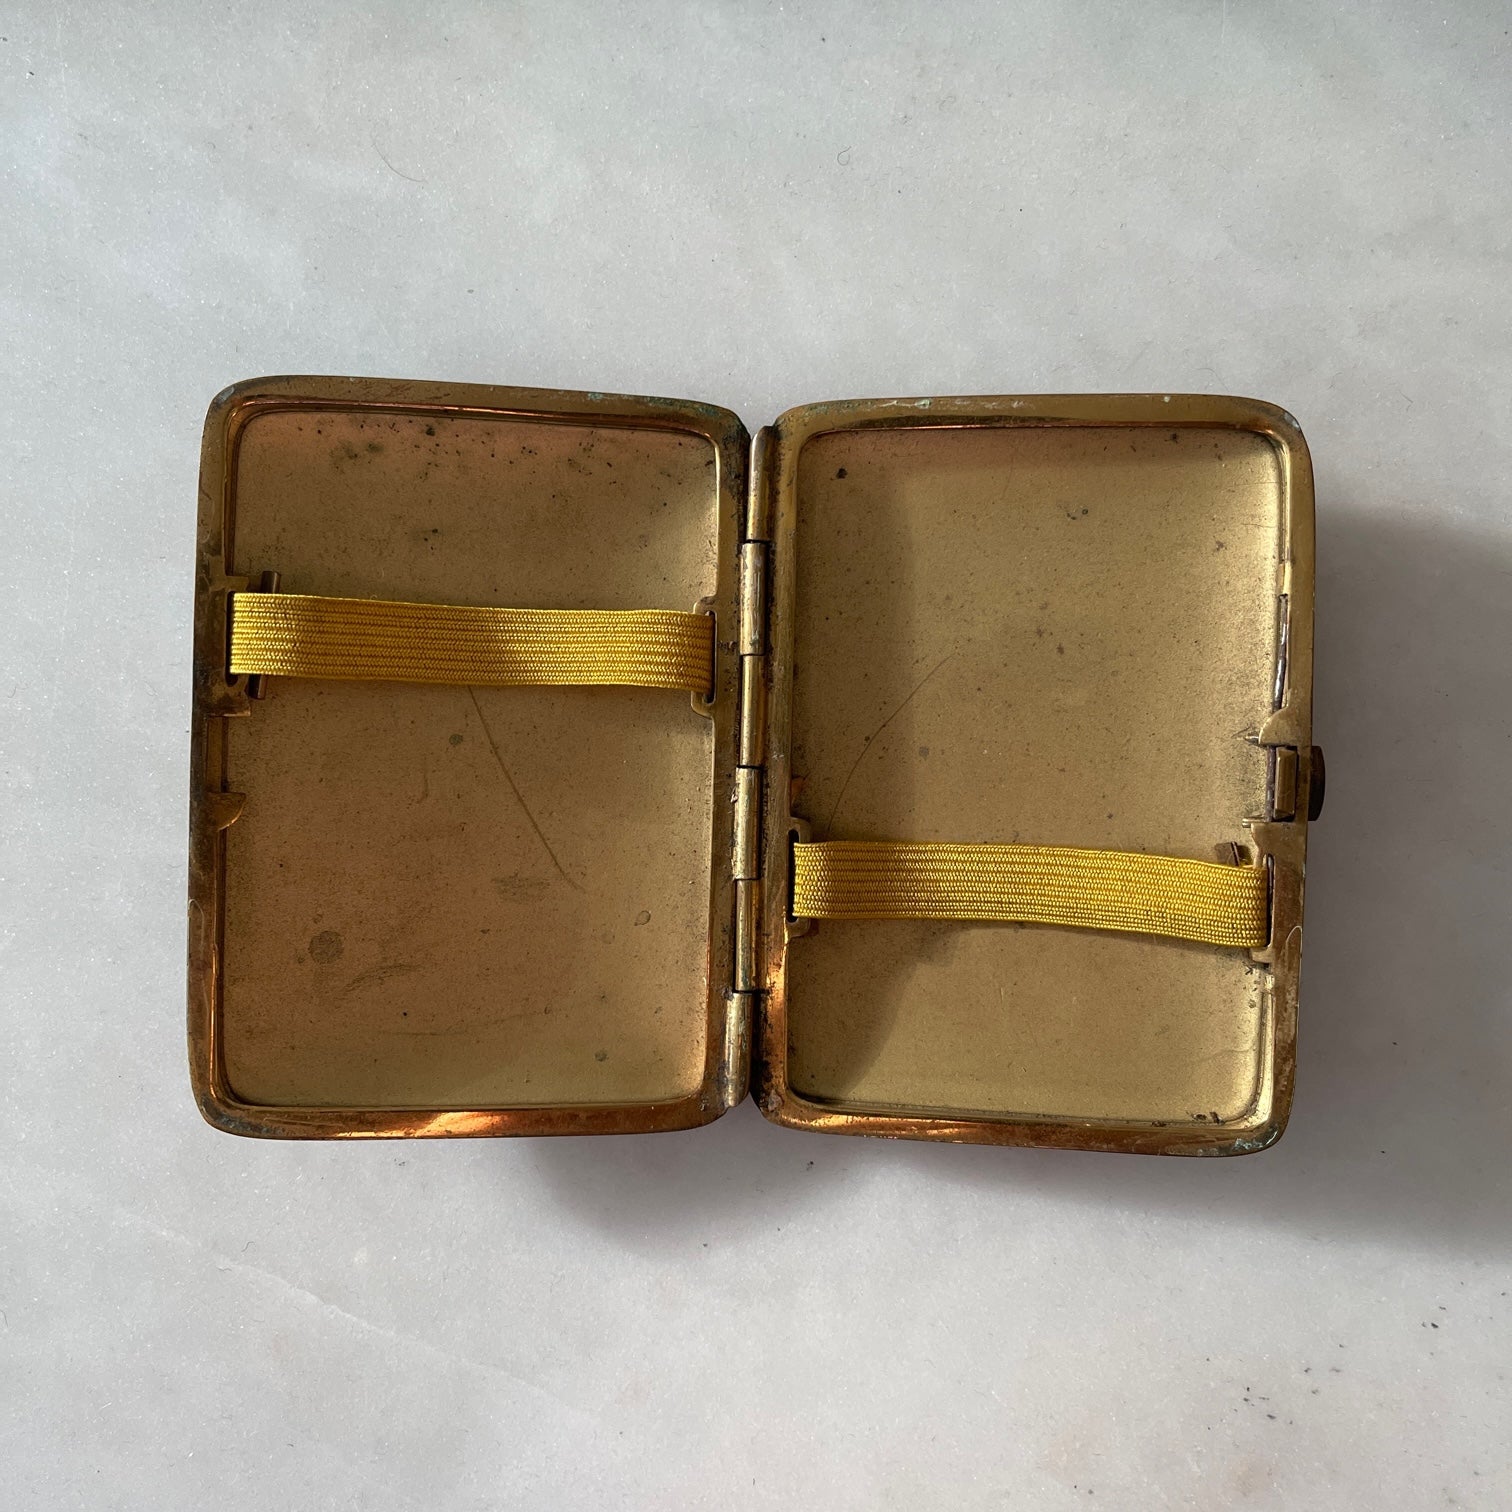 A beautifully Art Deco Eastern Inspired Cigarette Case. A striking bold colour palette with a golden interior - SHOP NOW - www.intovintage.co.uk